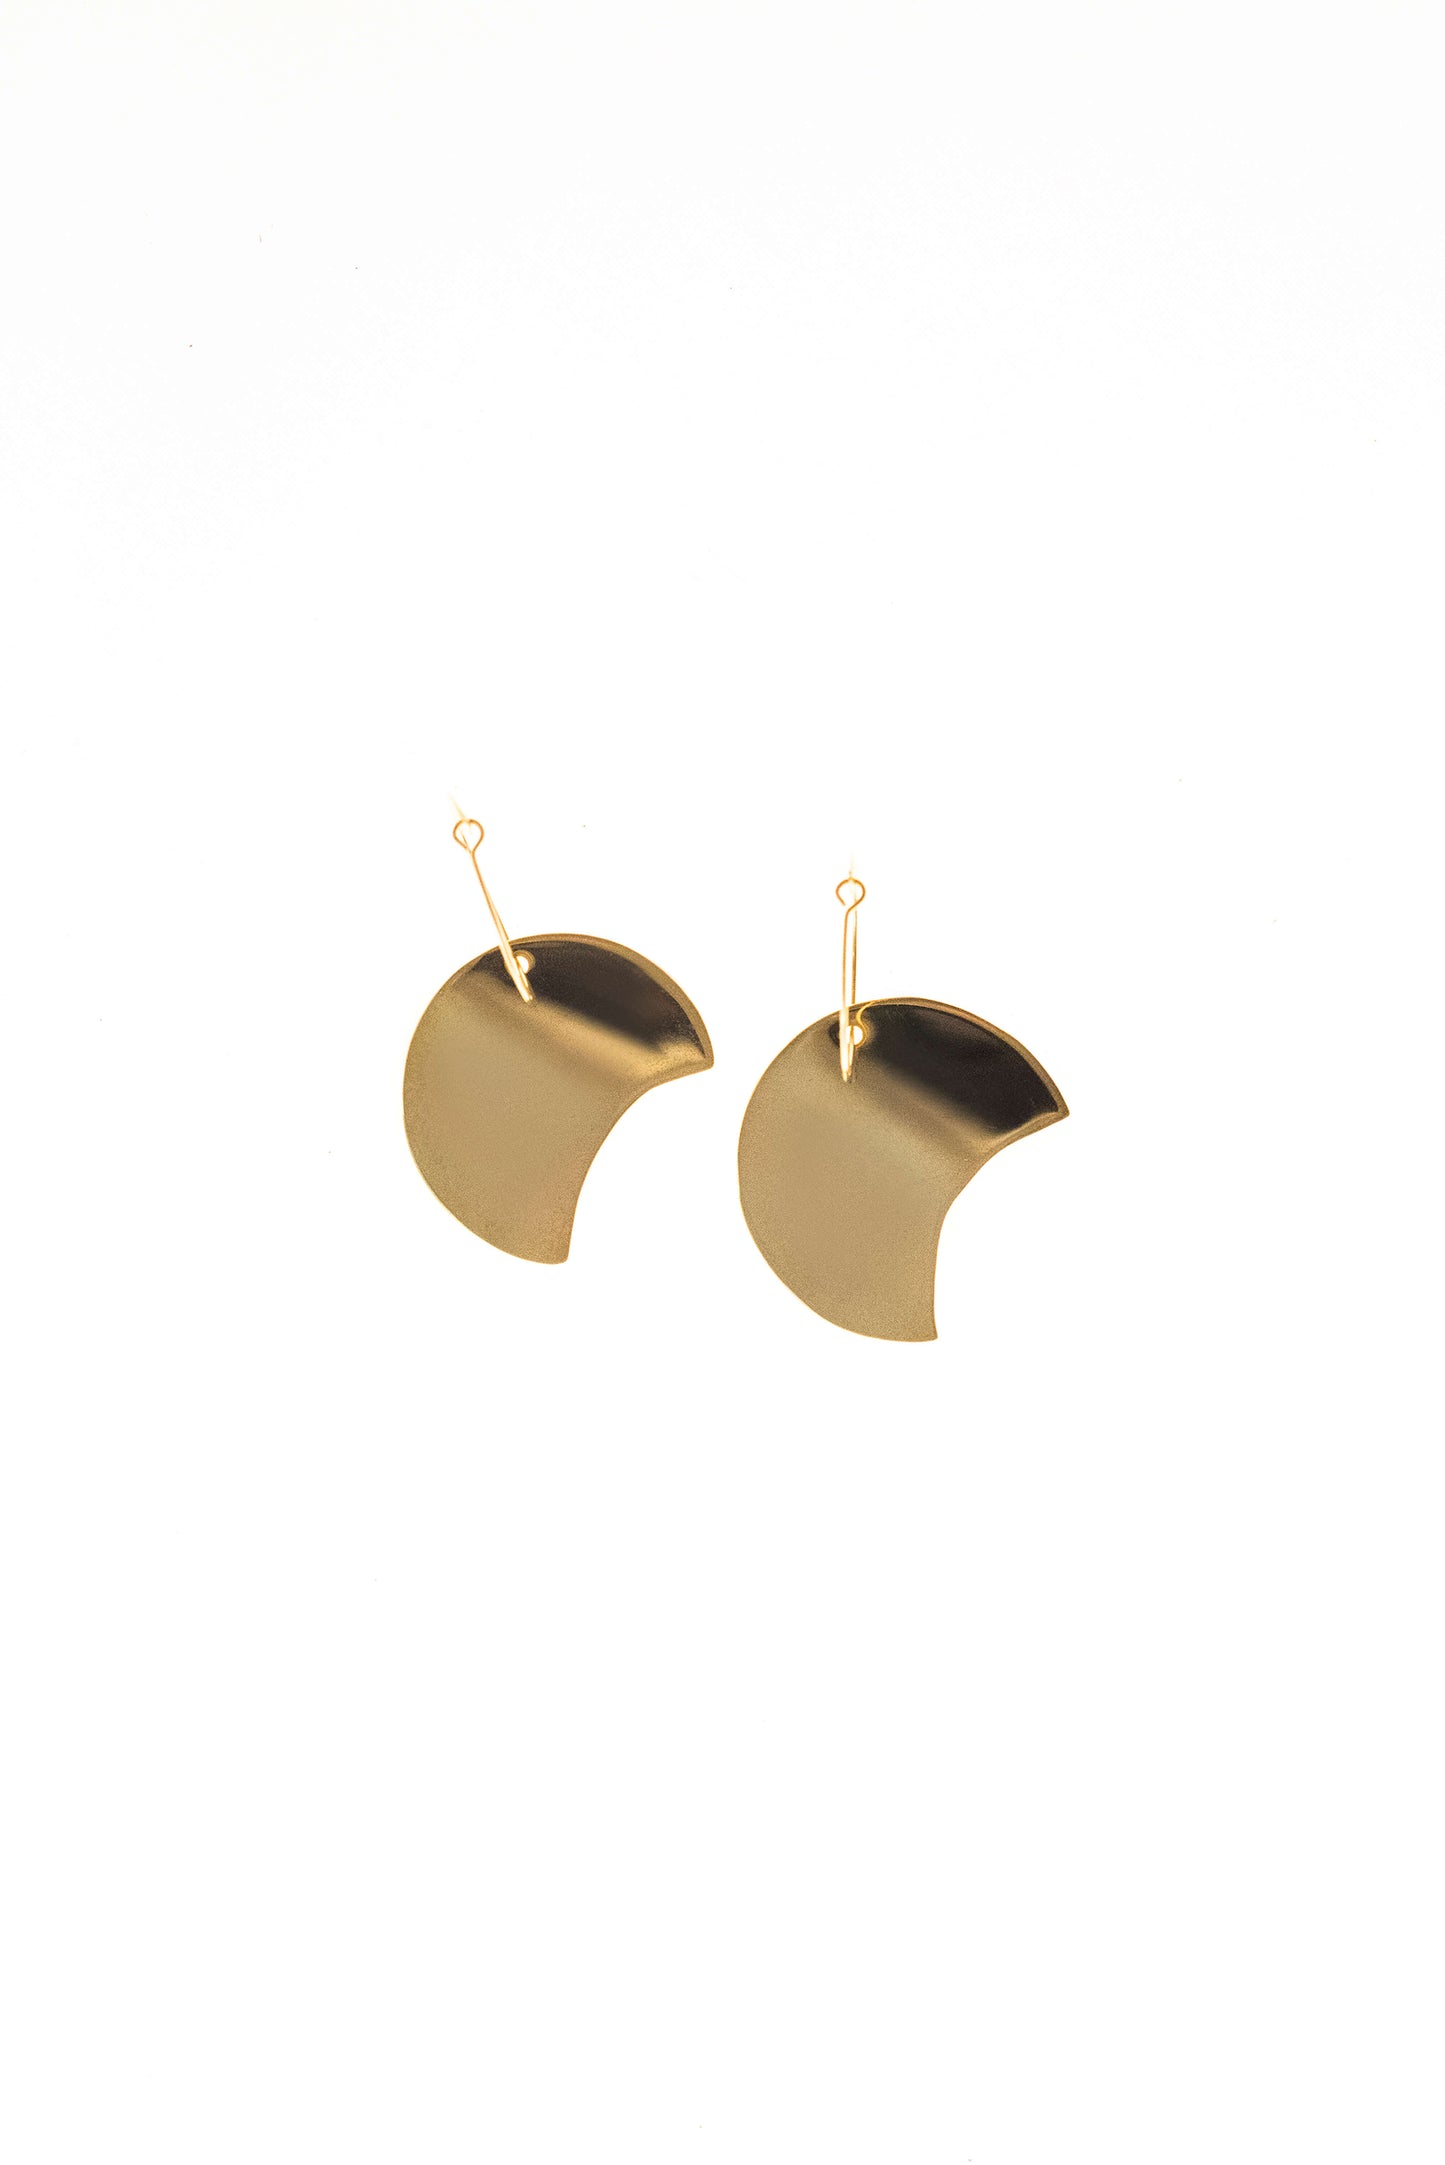 Earrings made of 24K gold plated brass.